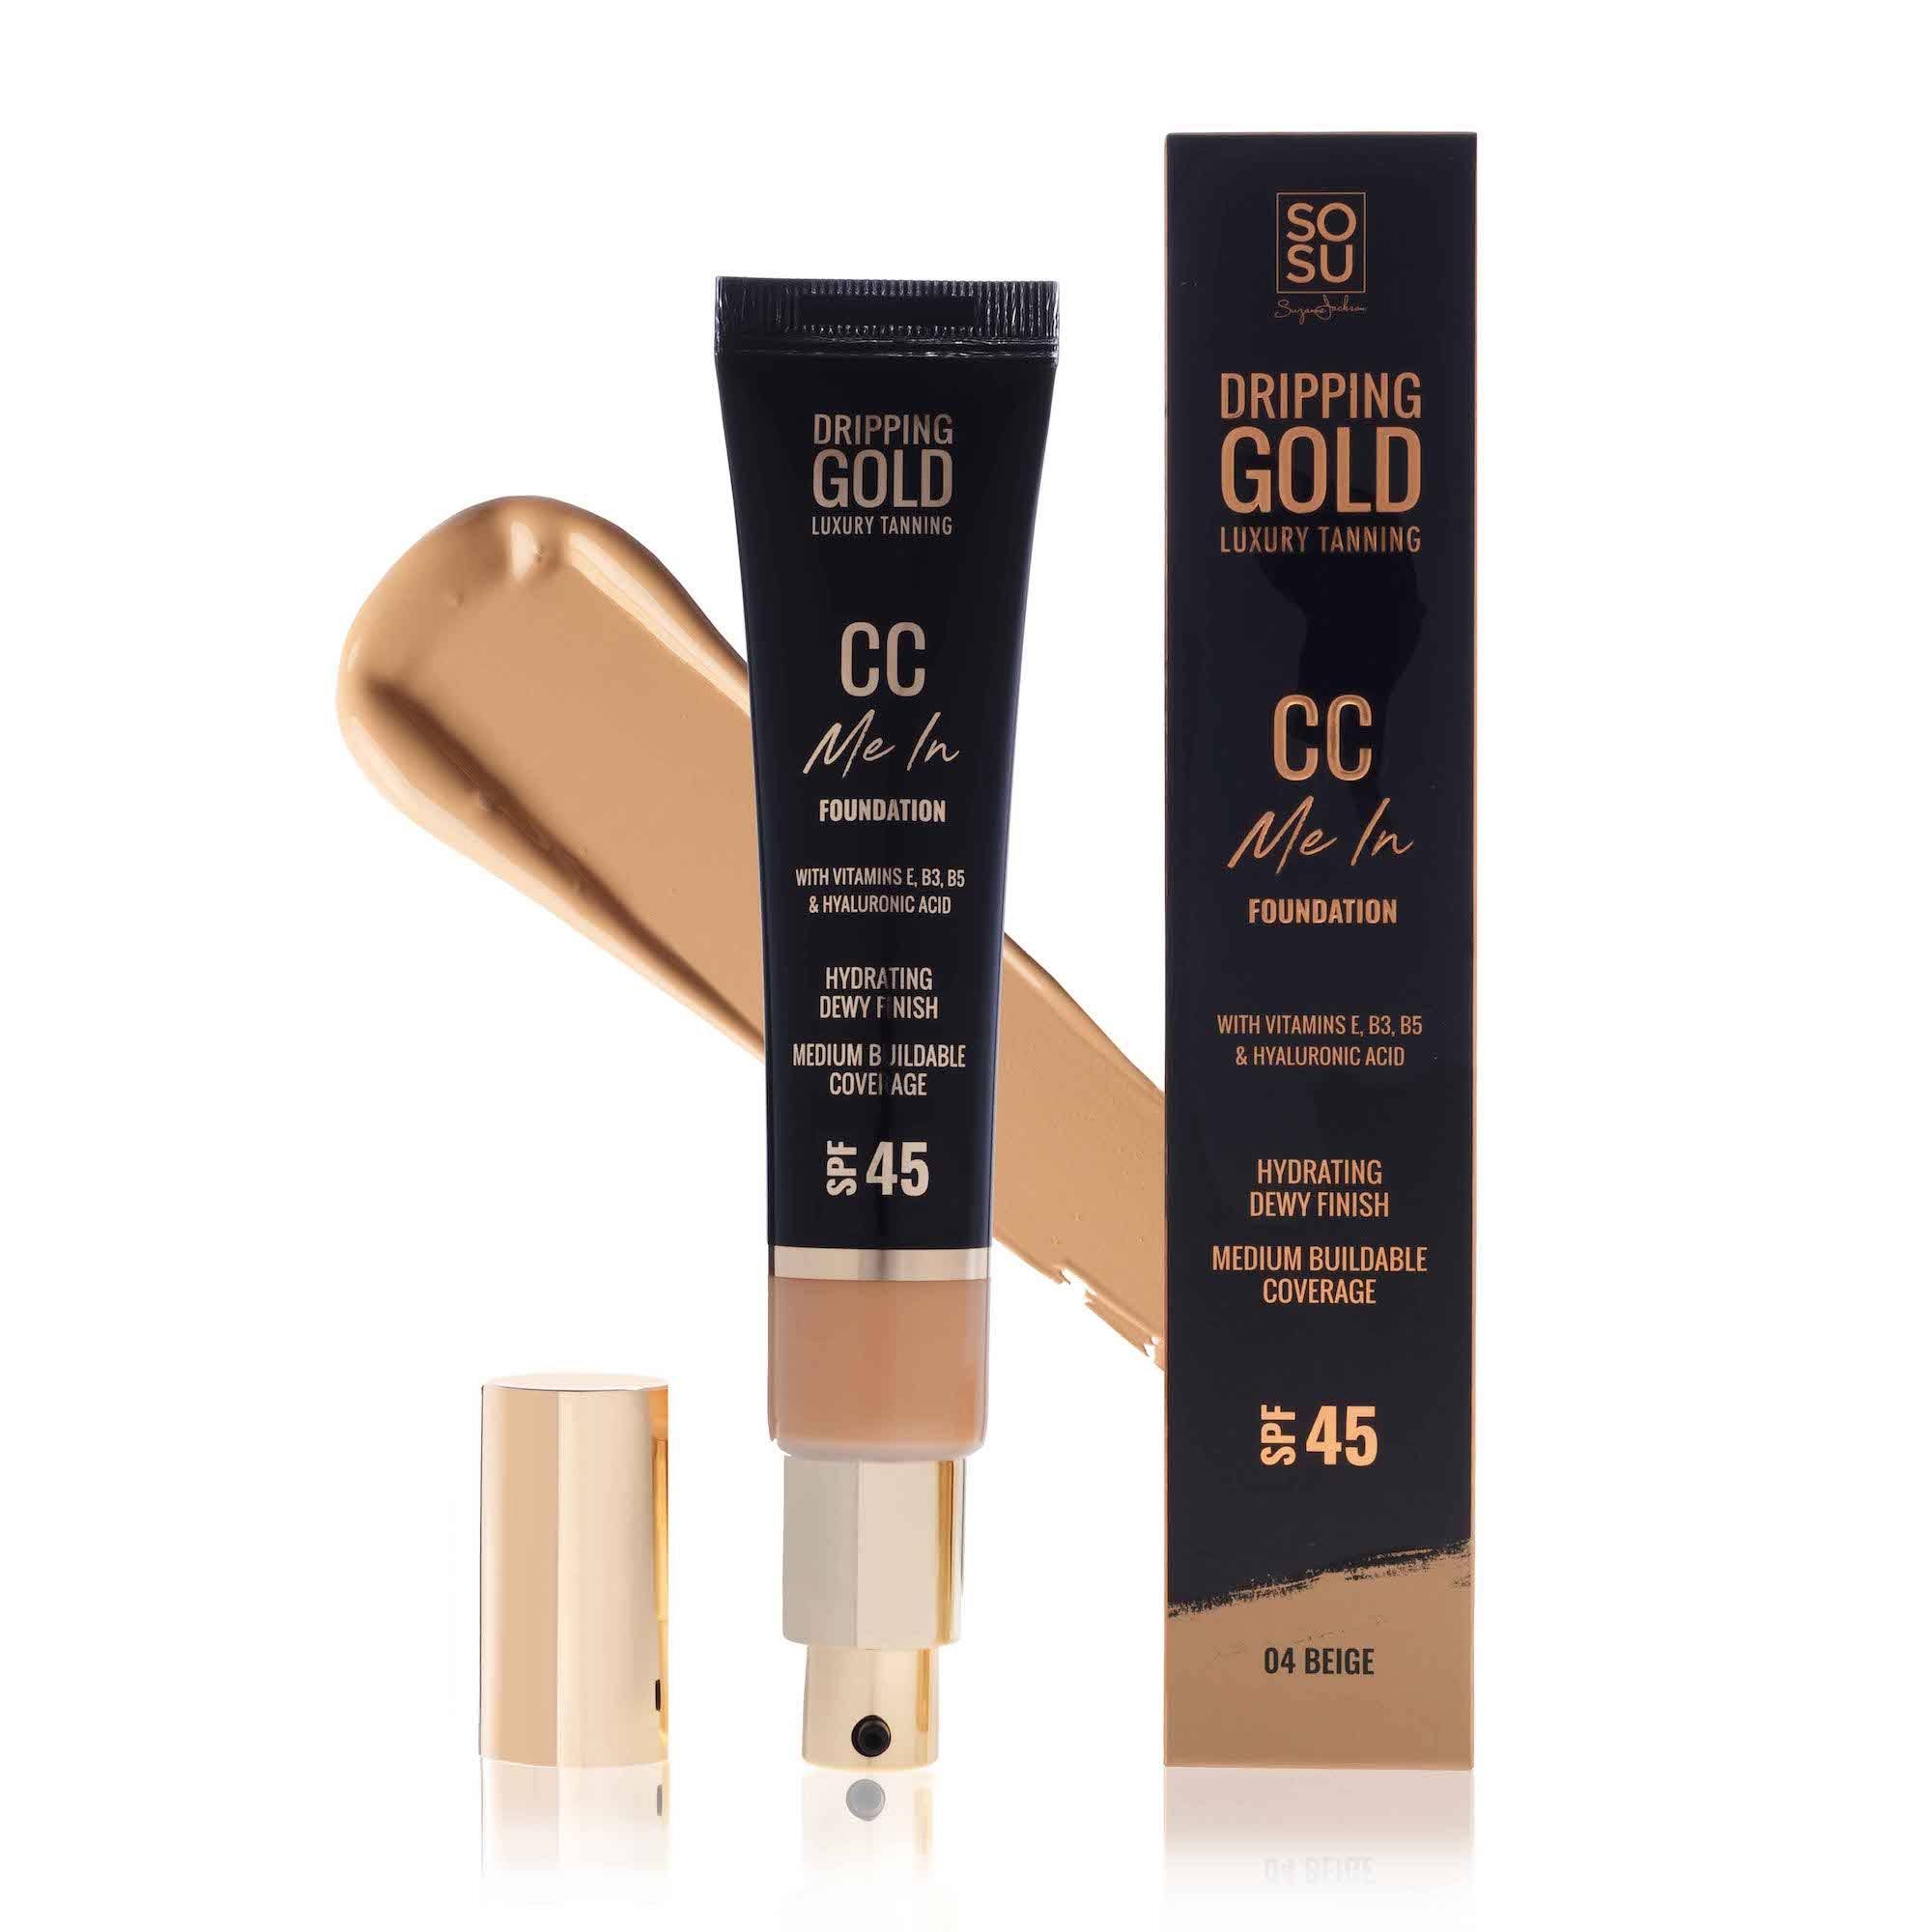 Dripping Gold by SOSU - CC ME IN FOUNDATION - 04 - Beige